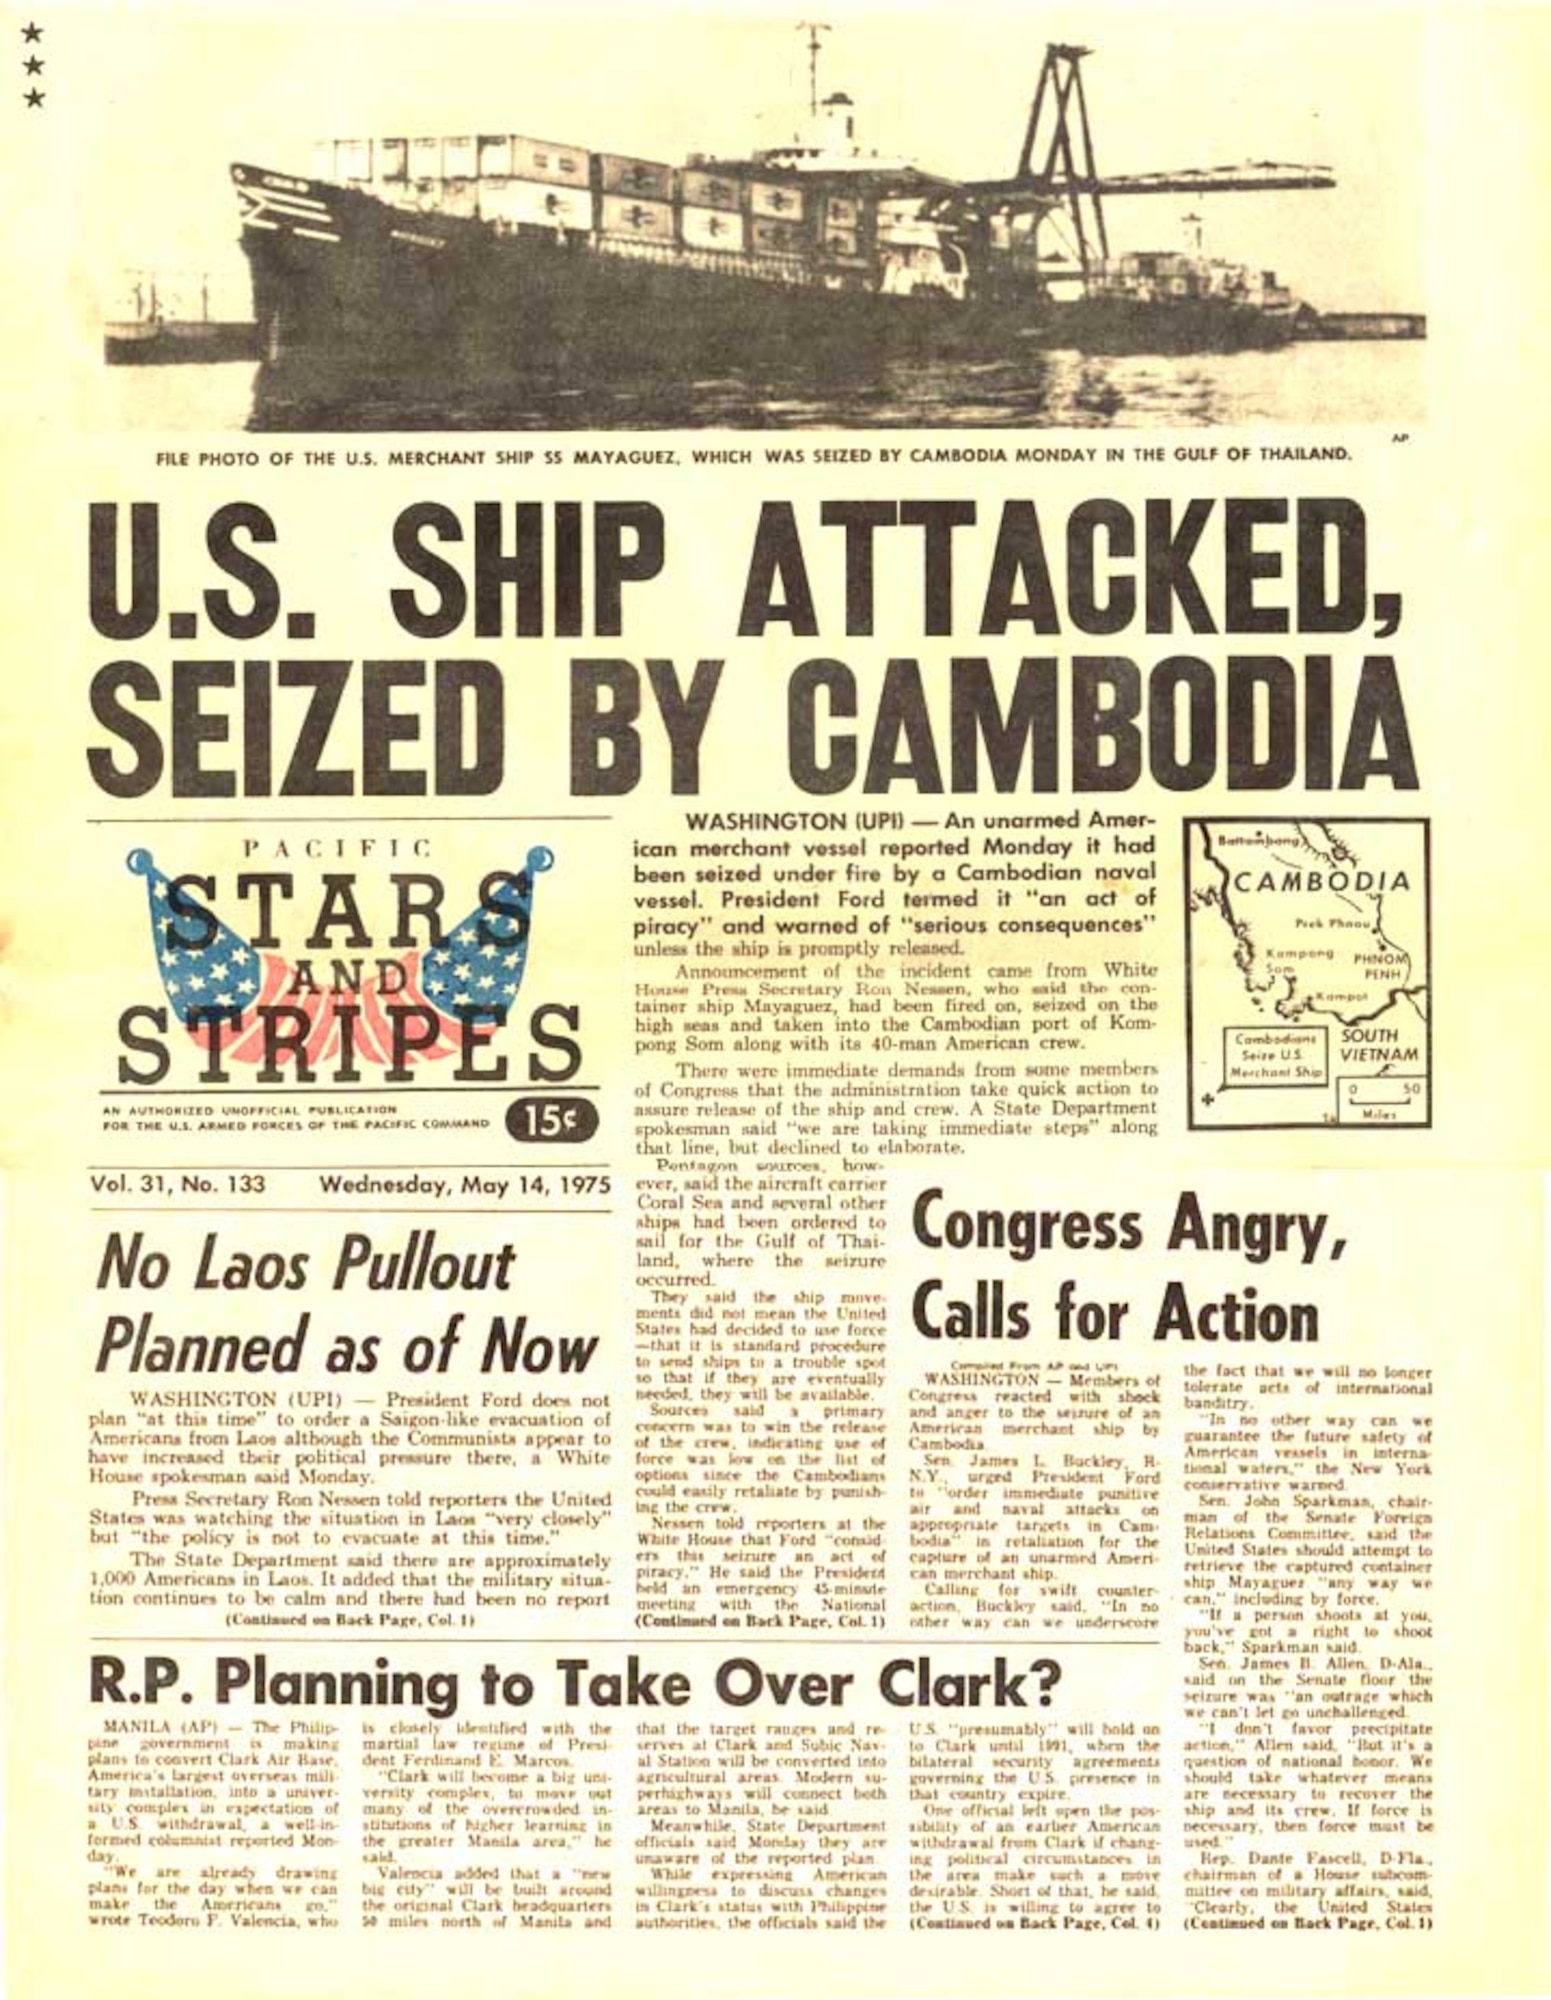 Cambodian gunboats seized the U.S. merchant ship Mayaguez and its 40-man crew May 12, 1975, 60 miles from the Cambodian coast. In response, Military Airlift Command transported U.S. Marines and equipment from the Philippines and Okinawa to Thailand. The crew was released on May 15, ending the last major American military action in Southeast Asia. (Courtesy Photo)